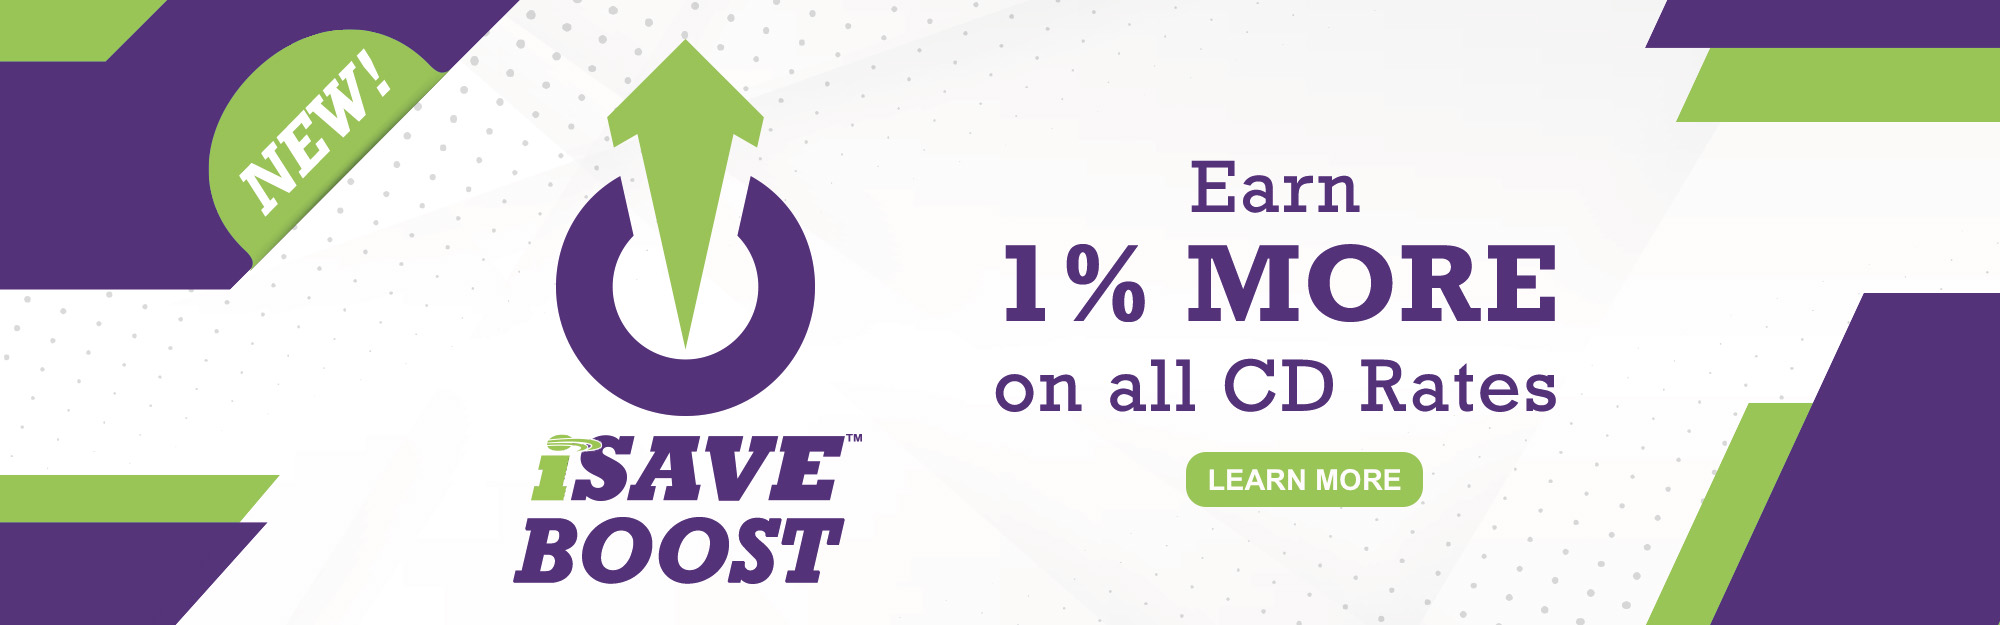 earn 1% more on all CD rates